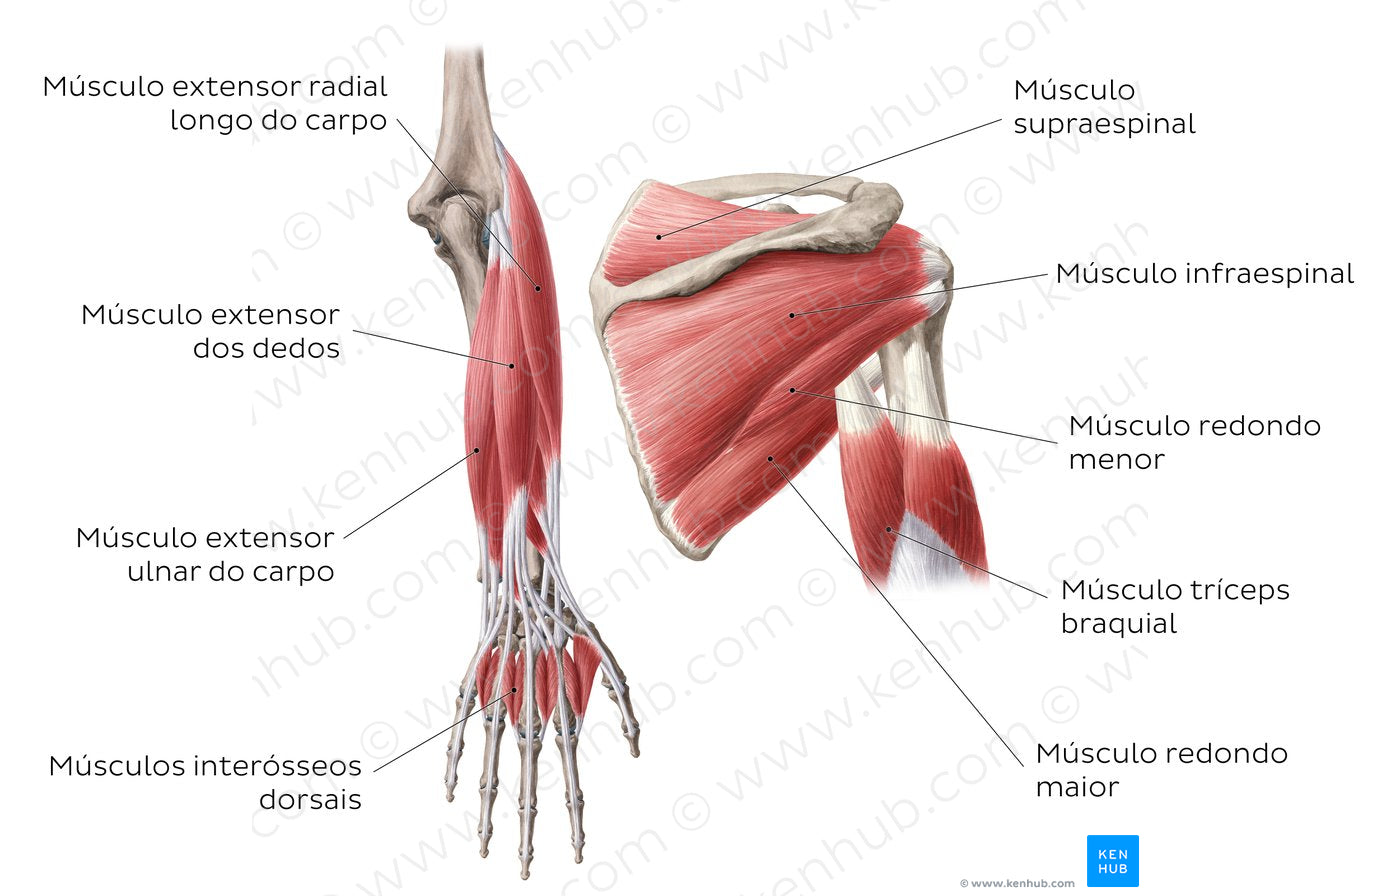 Main muscles of the upper limb - posterior (Portuguese)